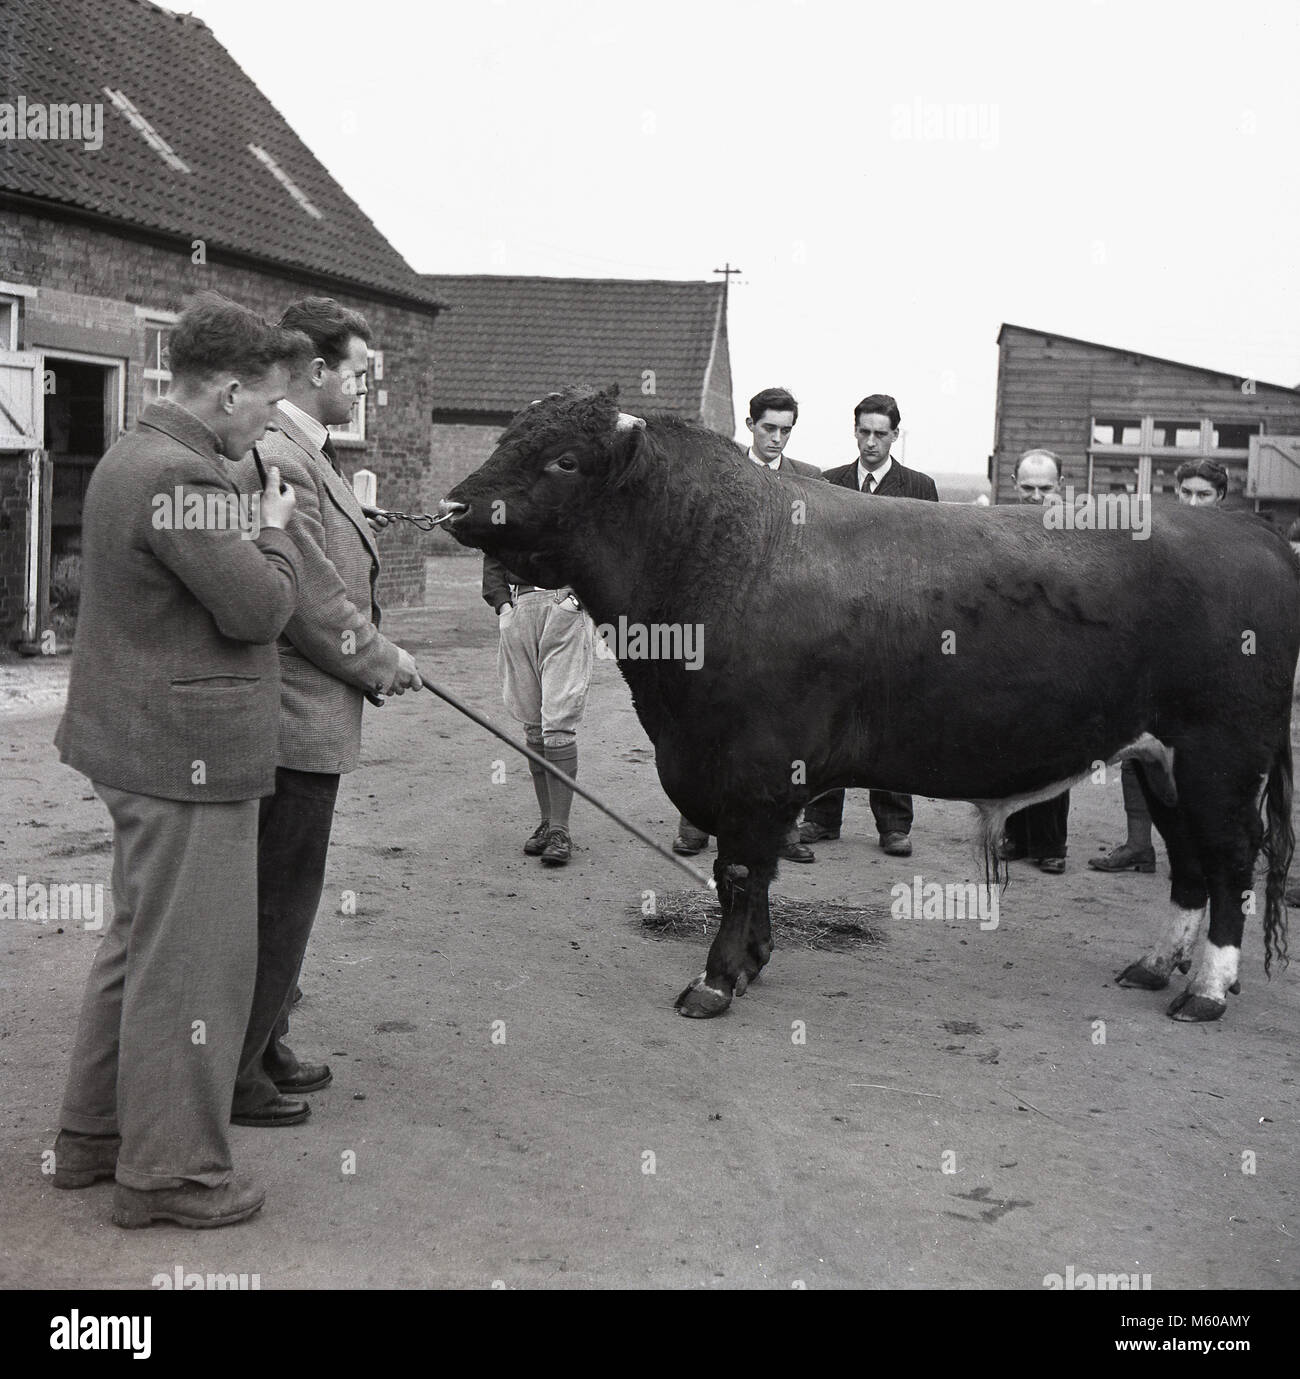 1950s, historical, standing outside in a farmyard, an instructor at an agricultural college, holding by a chain a a large bull, watched by a number of agricultural students, England, UK. In the post war years in Britain with continued food rationing, there was a special emphasis put on training young people about agriculture, farming methods and food production. Stock Photo